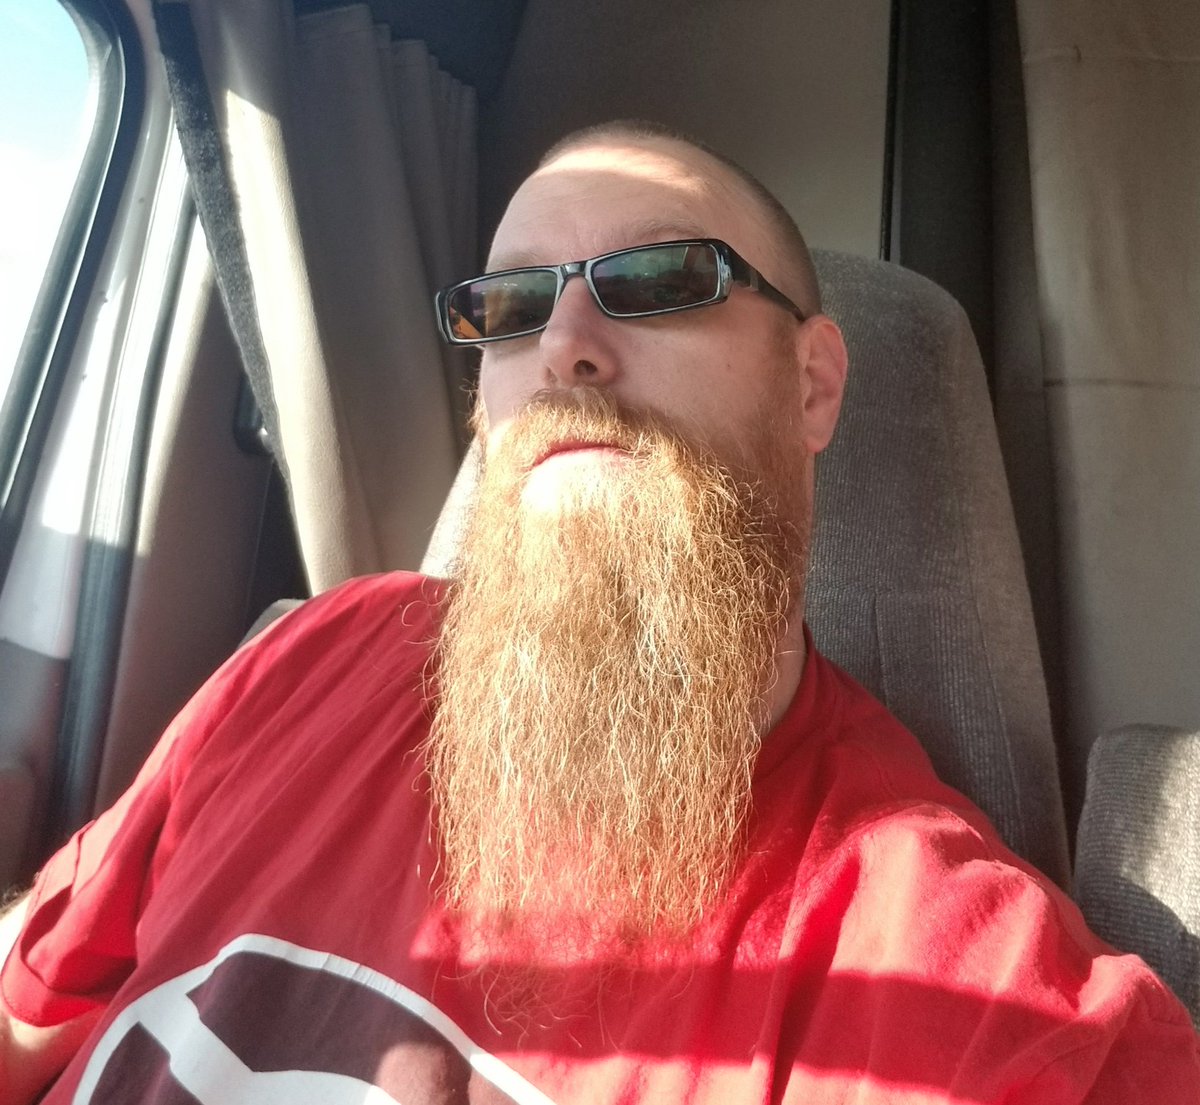 What up yall
#livebearded